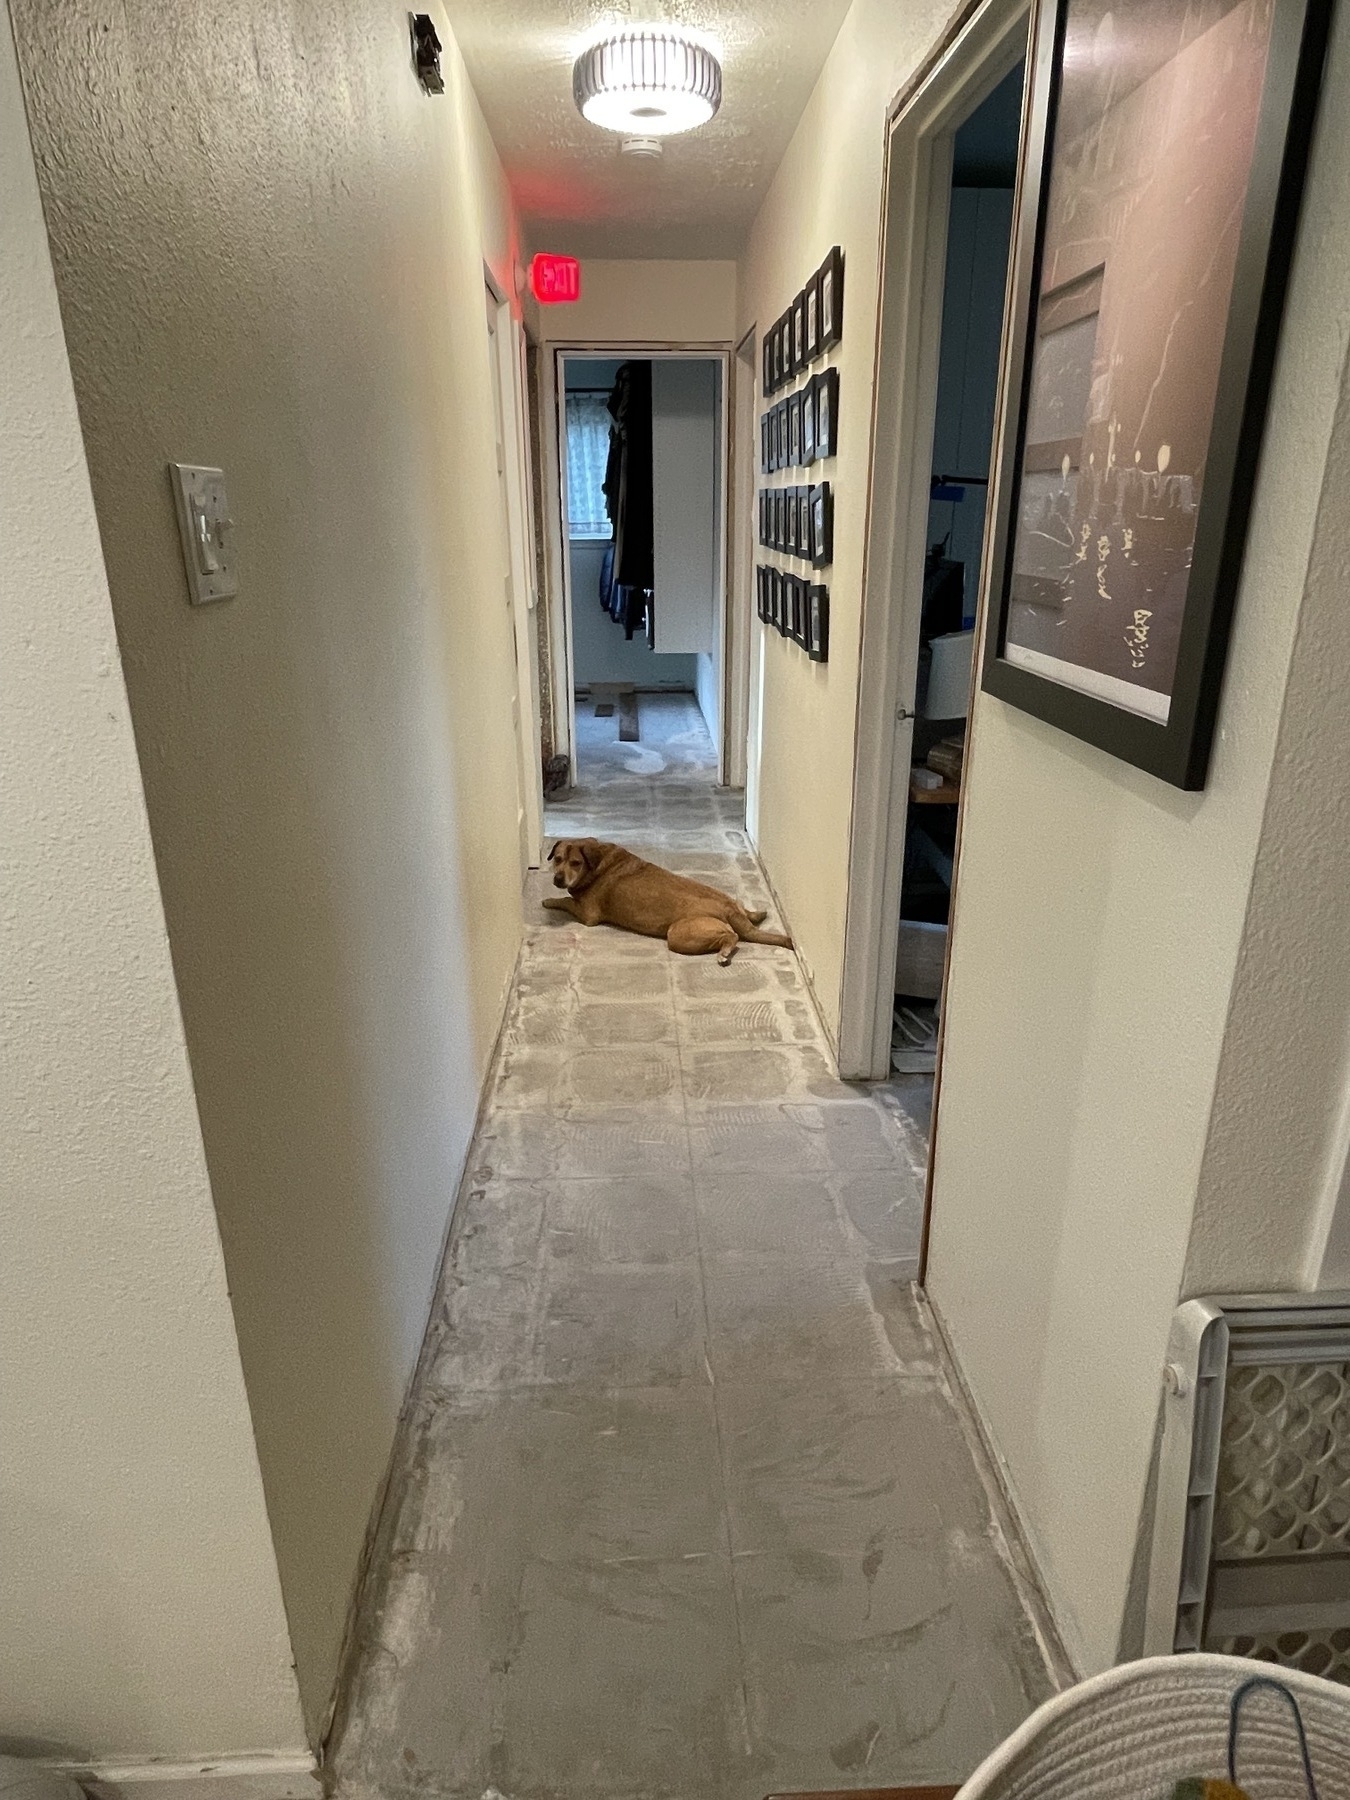 Main hallway free of tile with Chuck, the dog, looking at the camera while laying on the ground